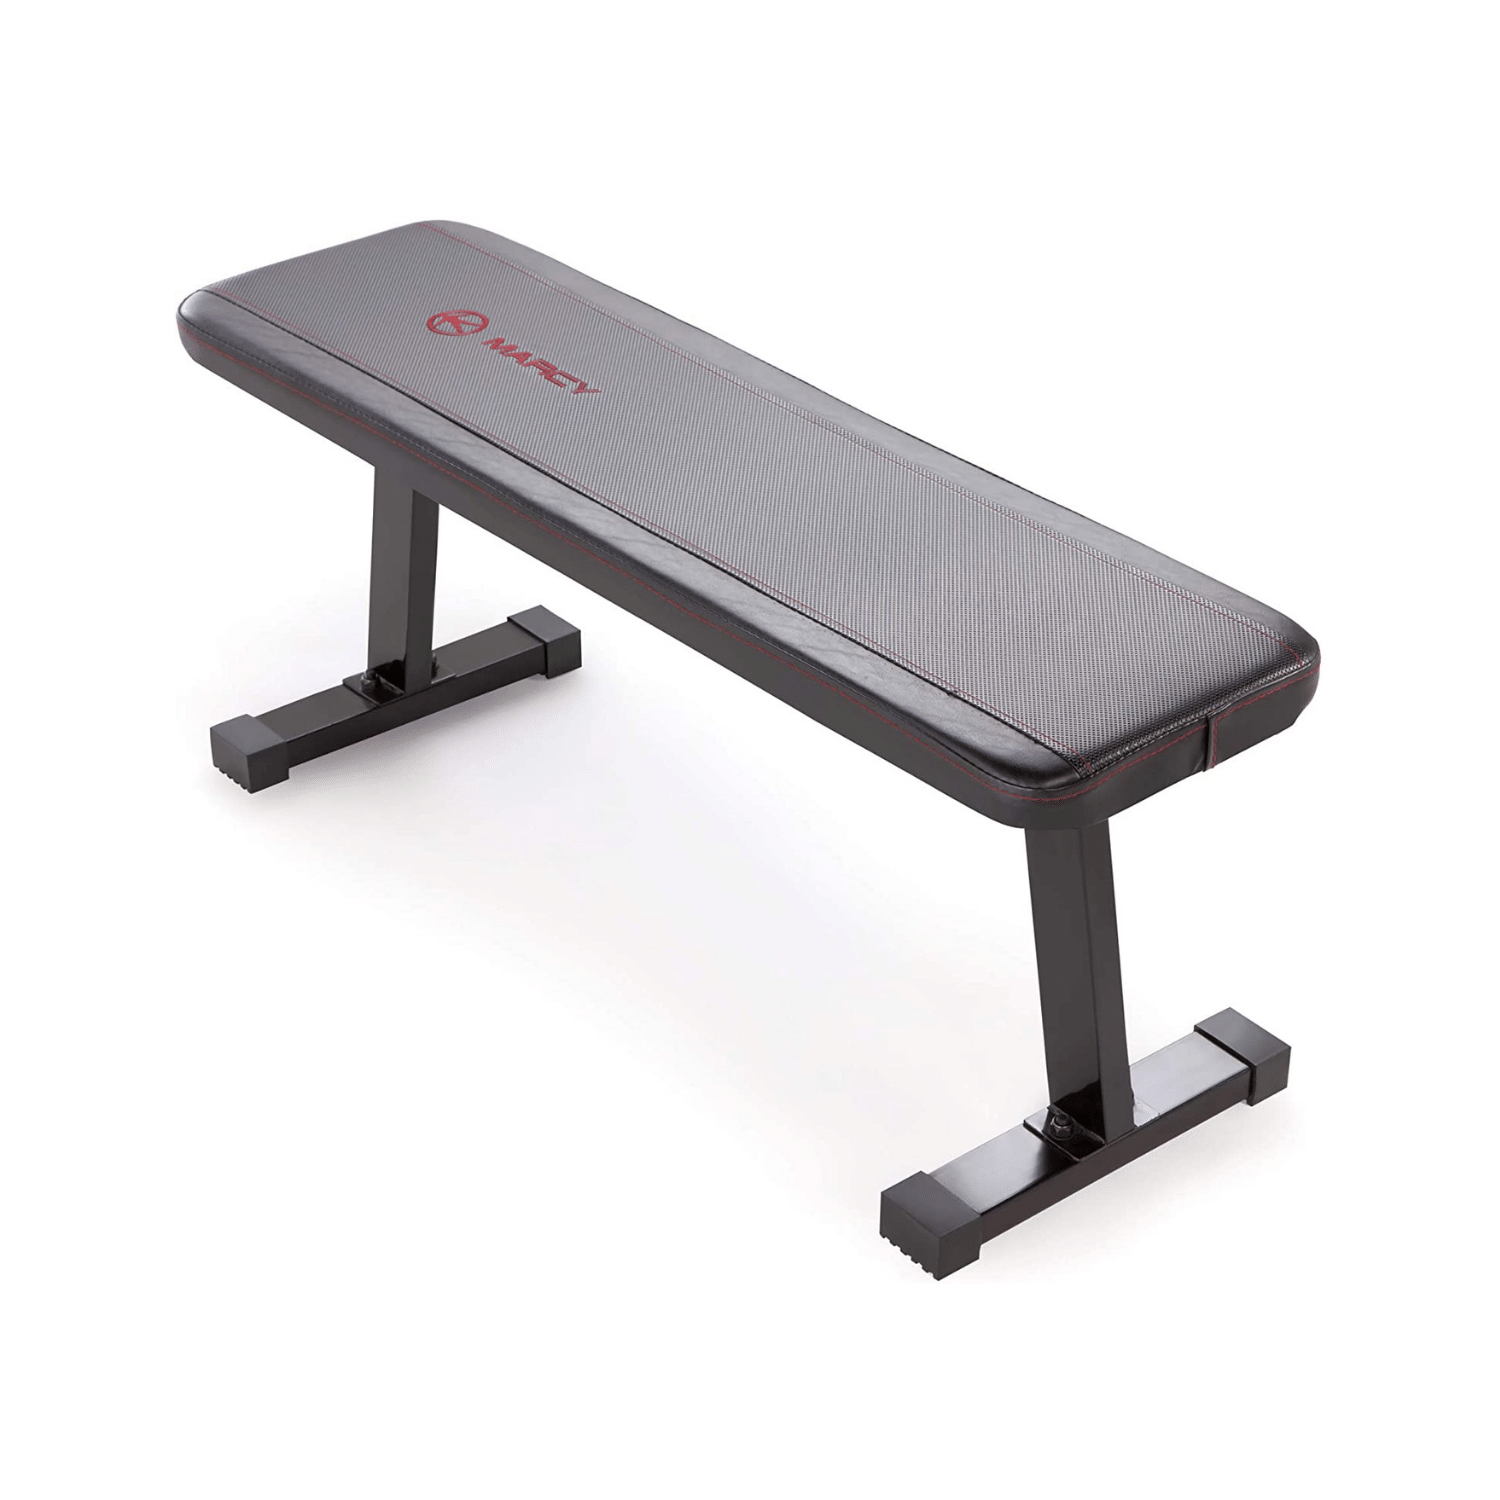 Marcy Flat Utility 600 lbs Capacity Weight Bench For Weight Training And Ab Exercises